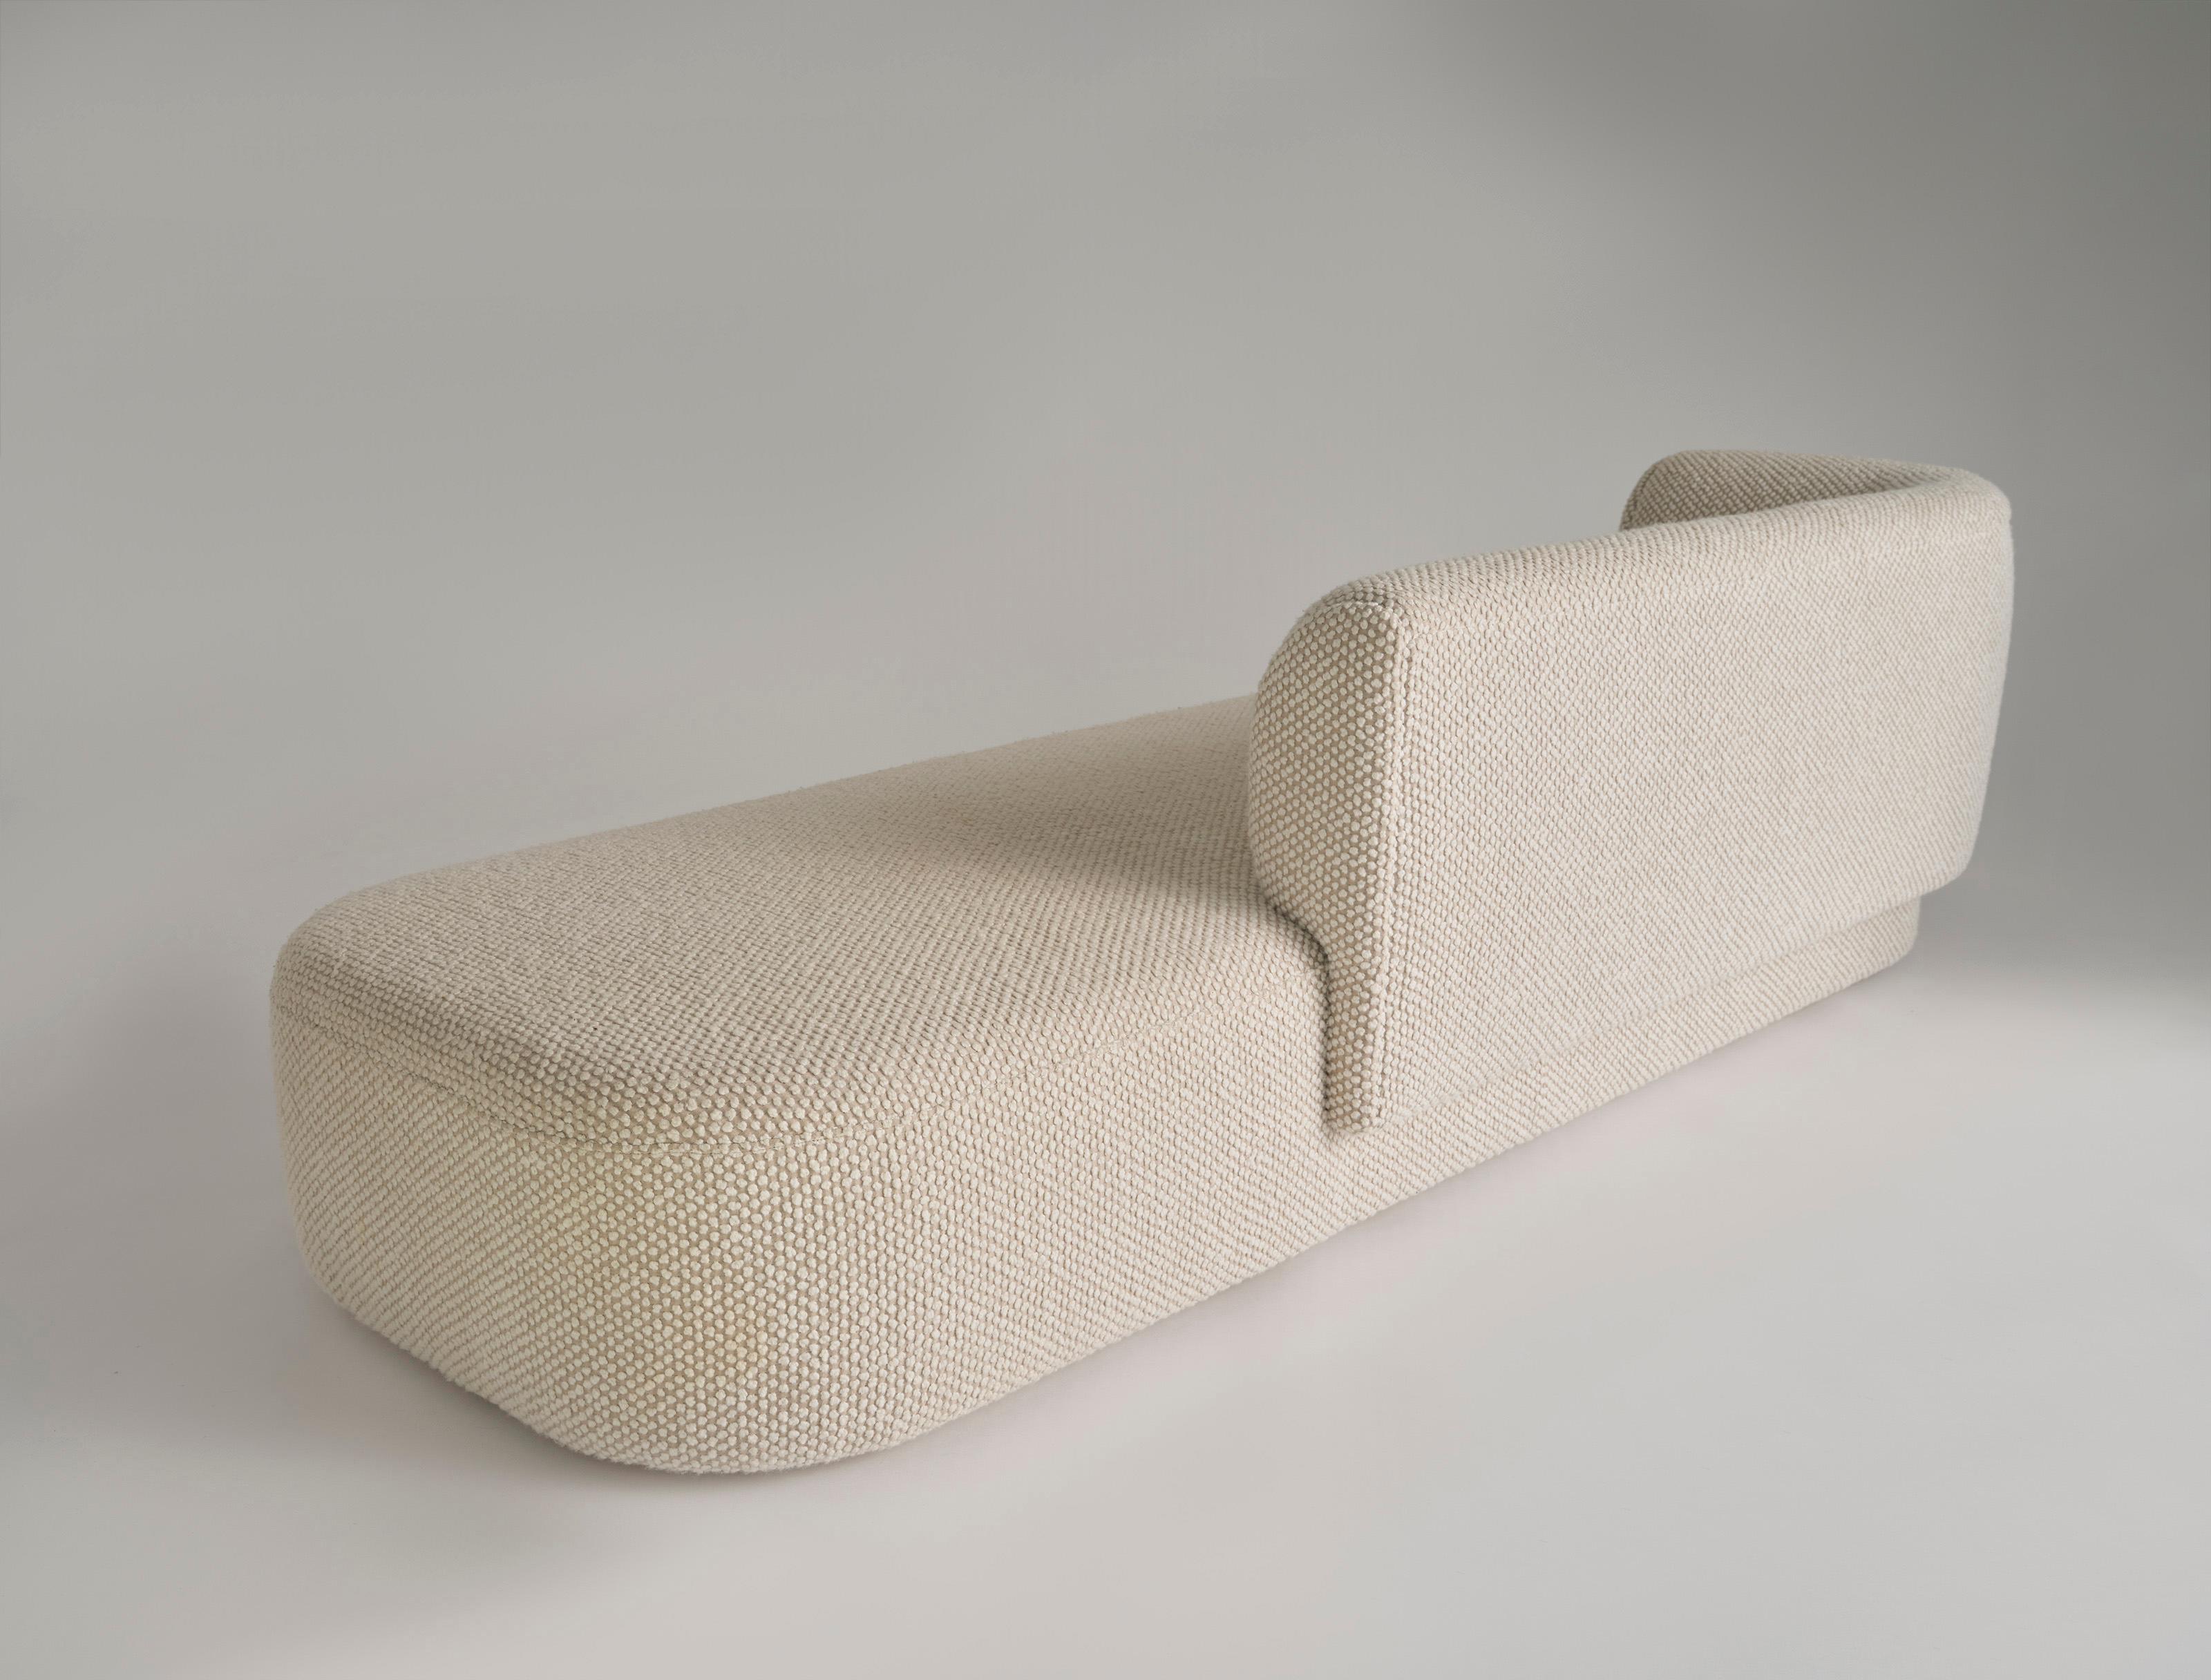 Other Capper Large Chaise Longue by Phase Design